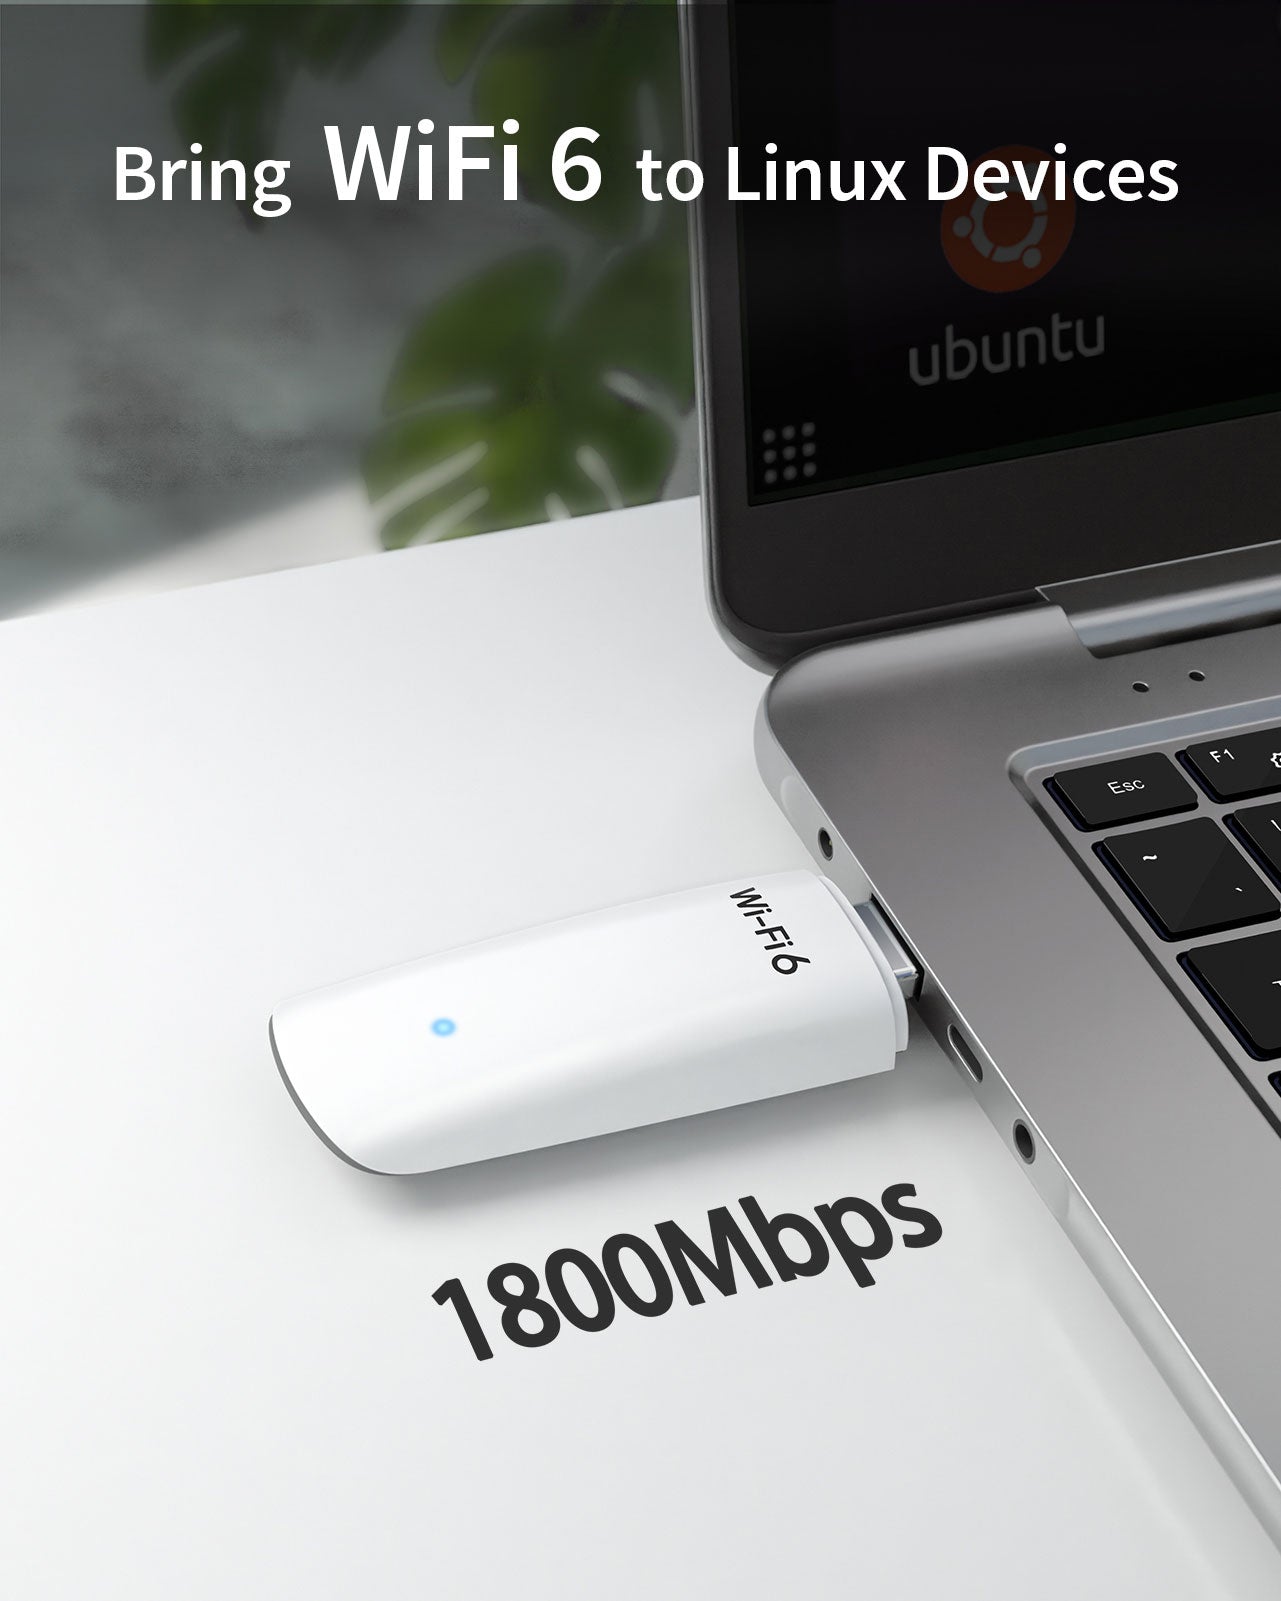 1800Mbps WiFi 6 Linux Compatible USB WiFi Adapter Brings Blazing Fast Dual Band WiFi 6 Connection for Linux Devices 6 Times Faster Than N300 USB WiFi Adapter